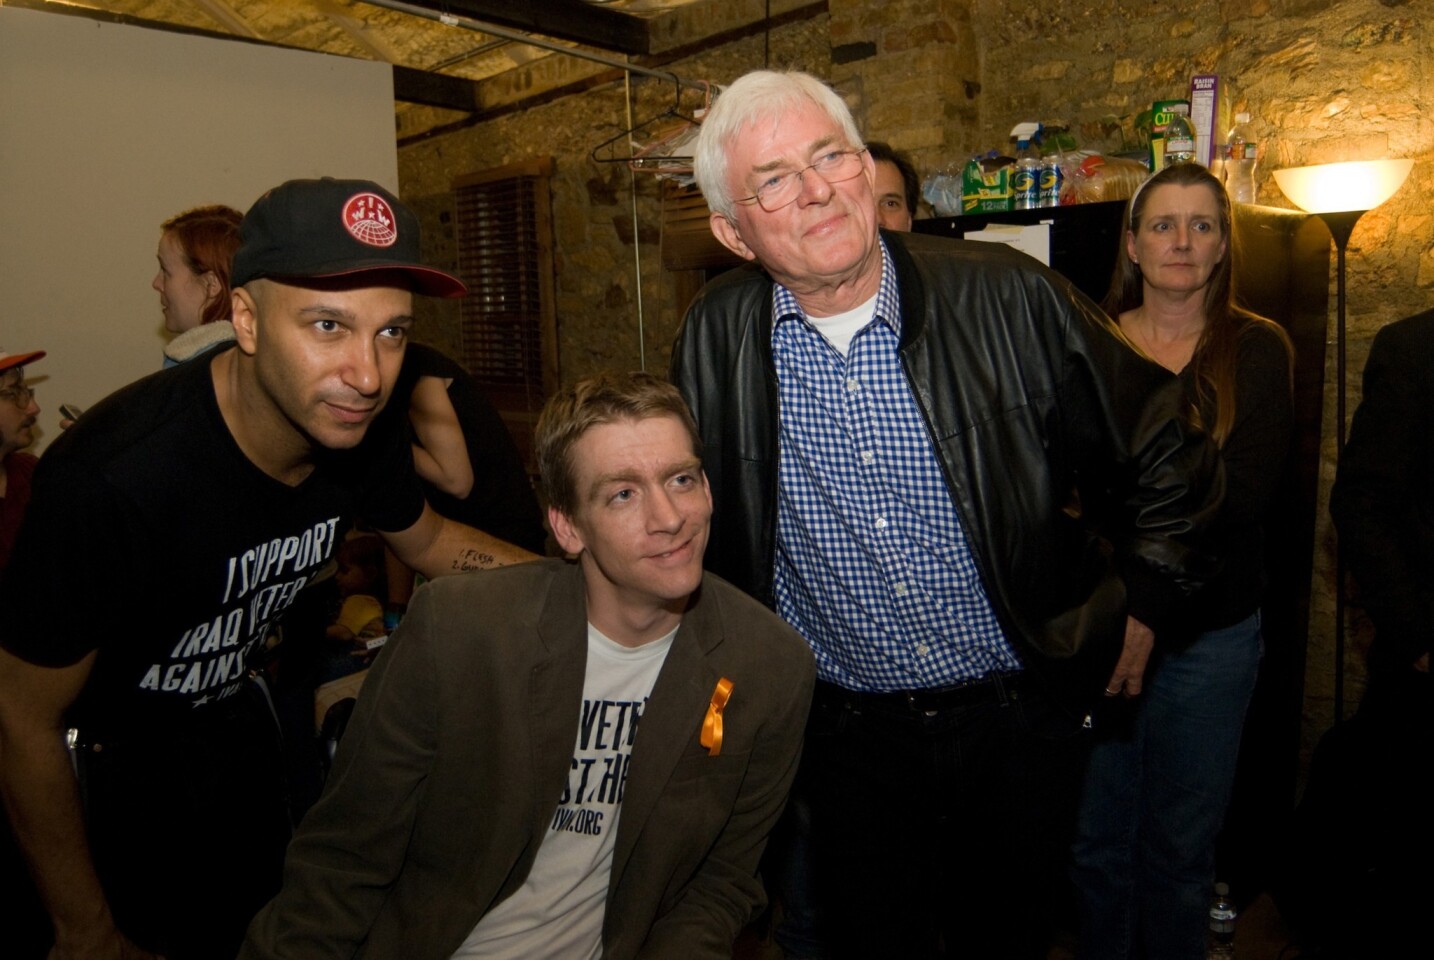 Musician Tom Morello, left, and Phil Donahue flank Tomas Young. Donahue produced and directed a documentary about Young with Ellen Spiro.